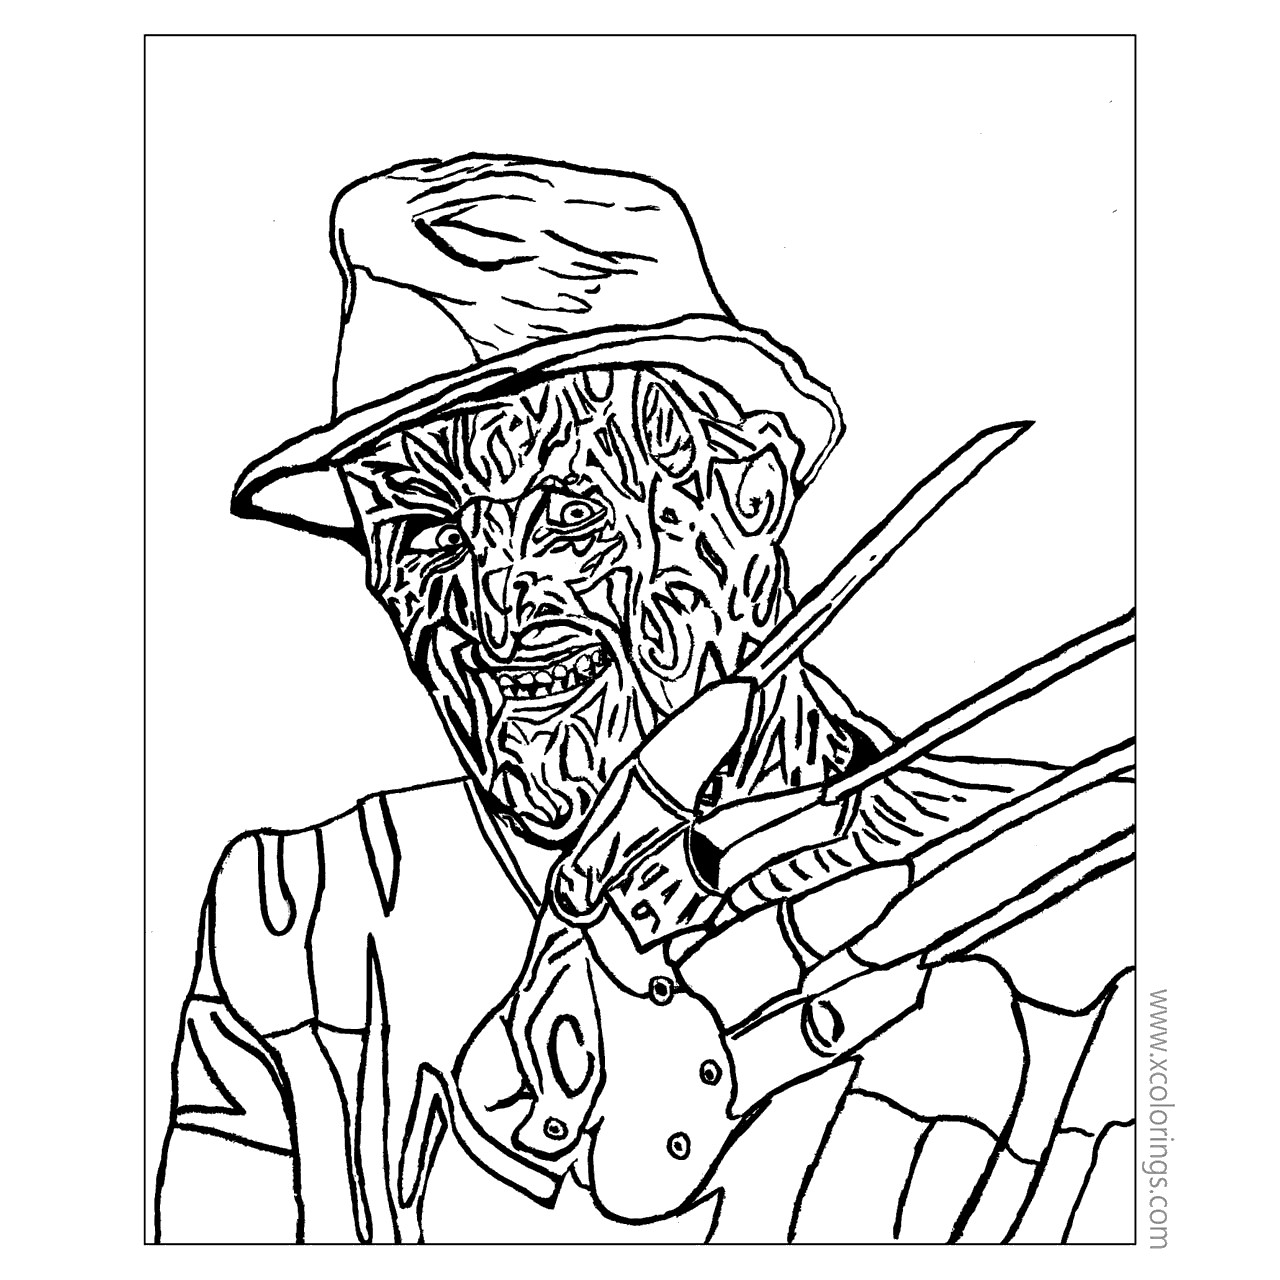 Free Horrible Freddy Krueger Coloring Pages printable